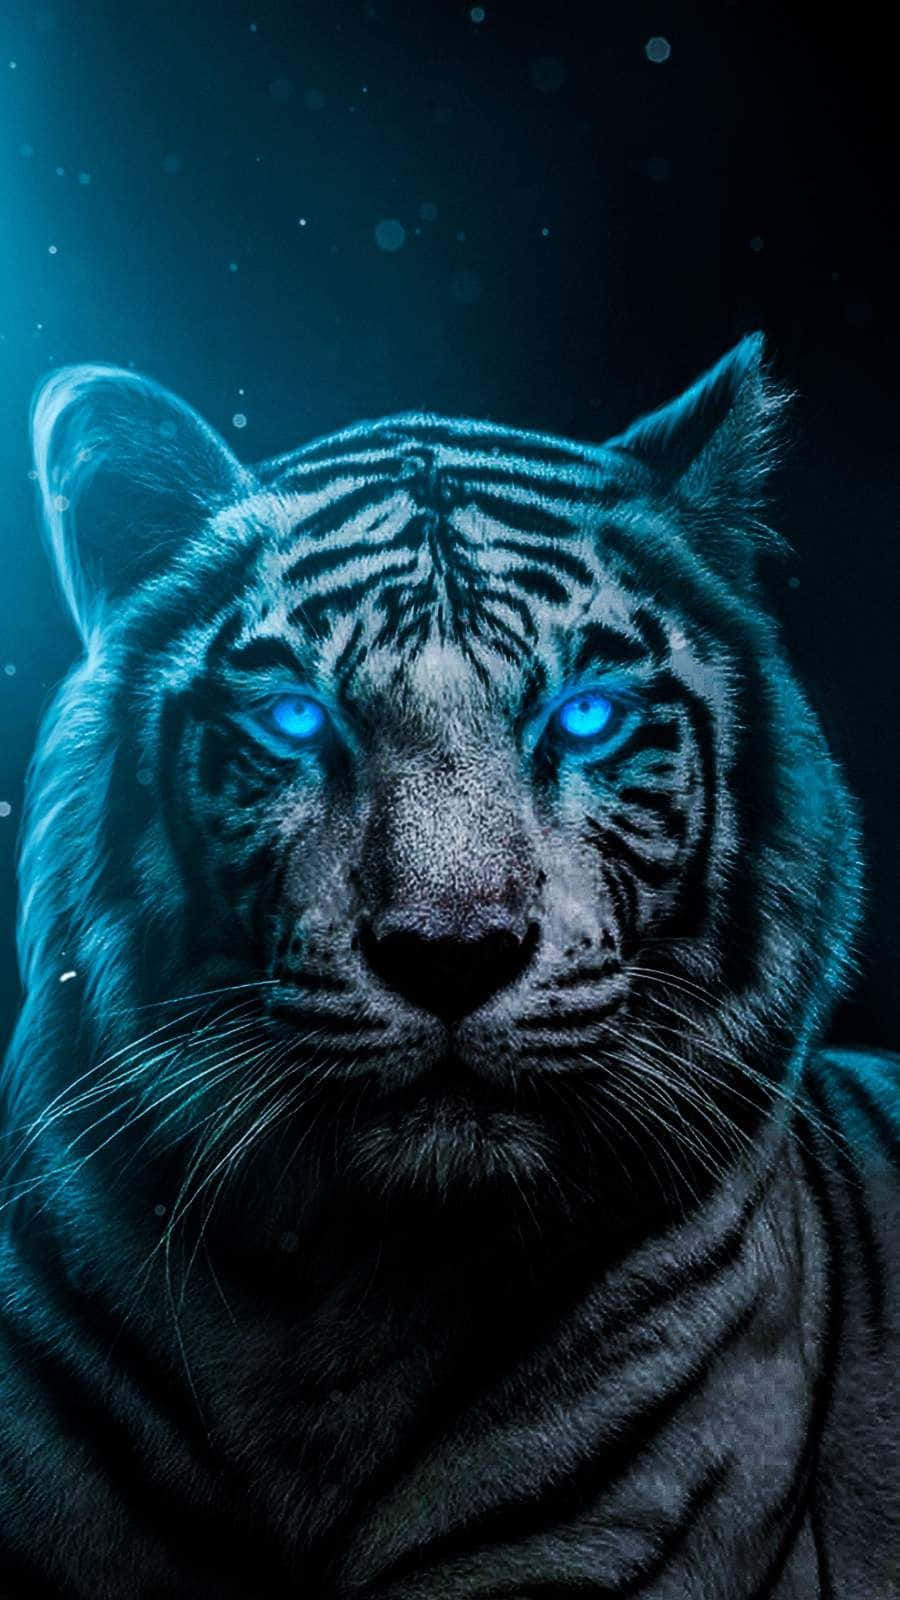 A White Tiger With Blue Eyes In The Dark Wallpaper